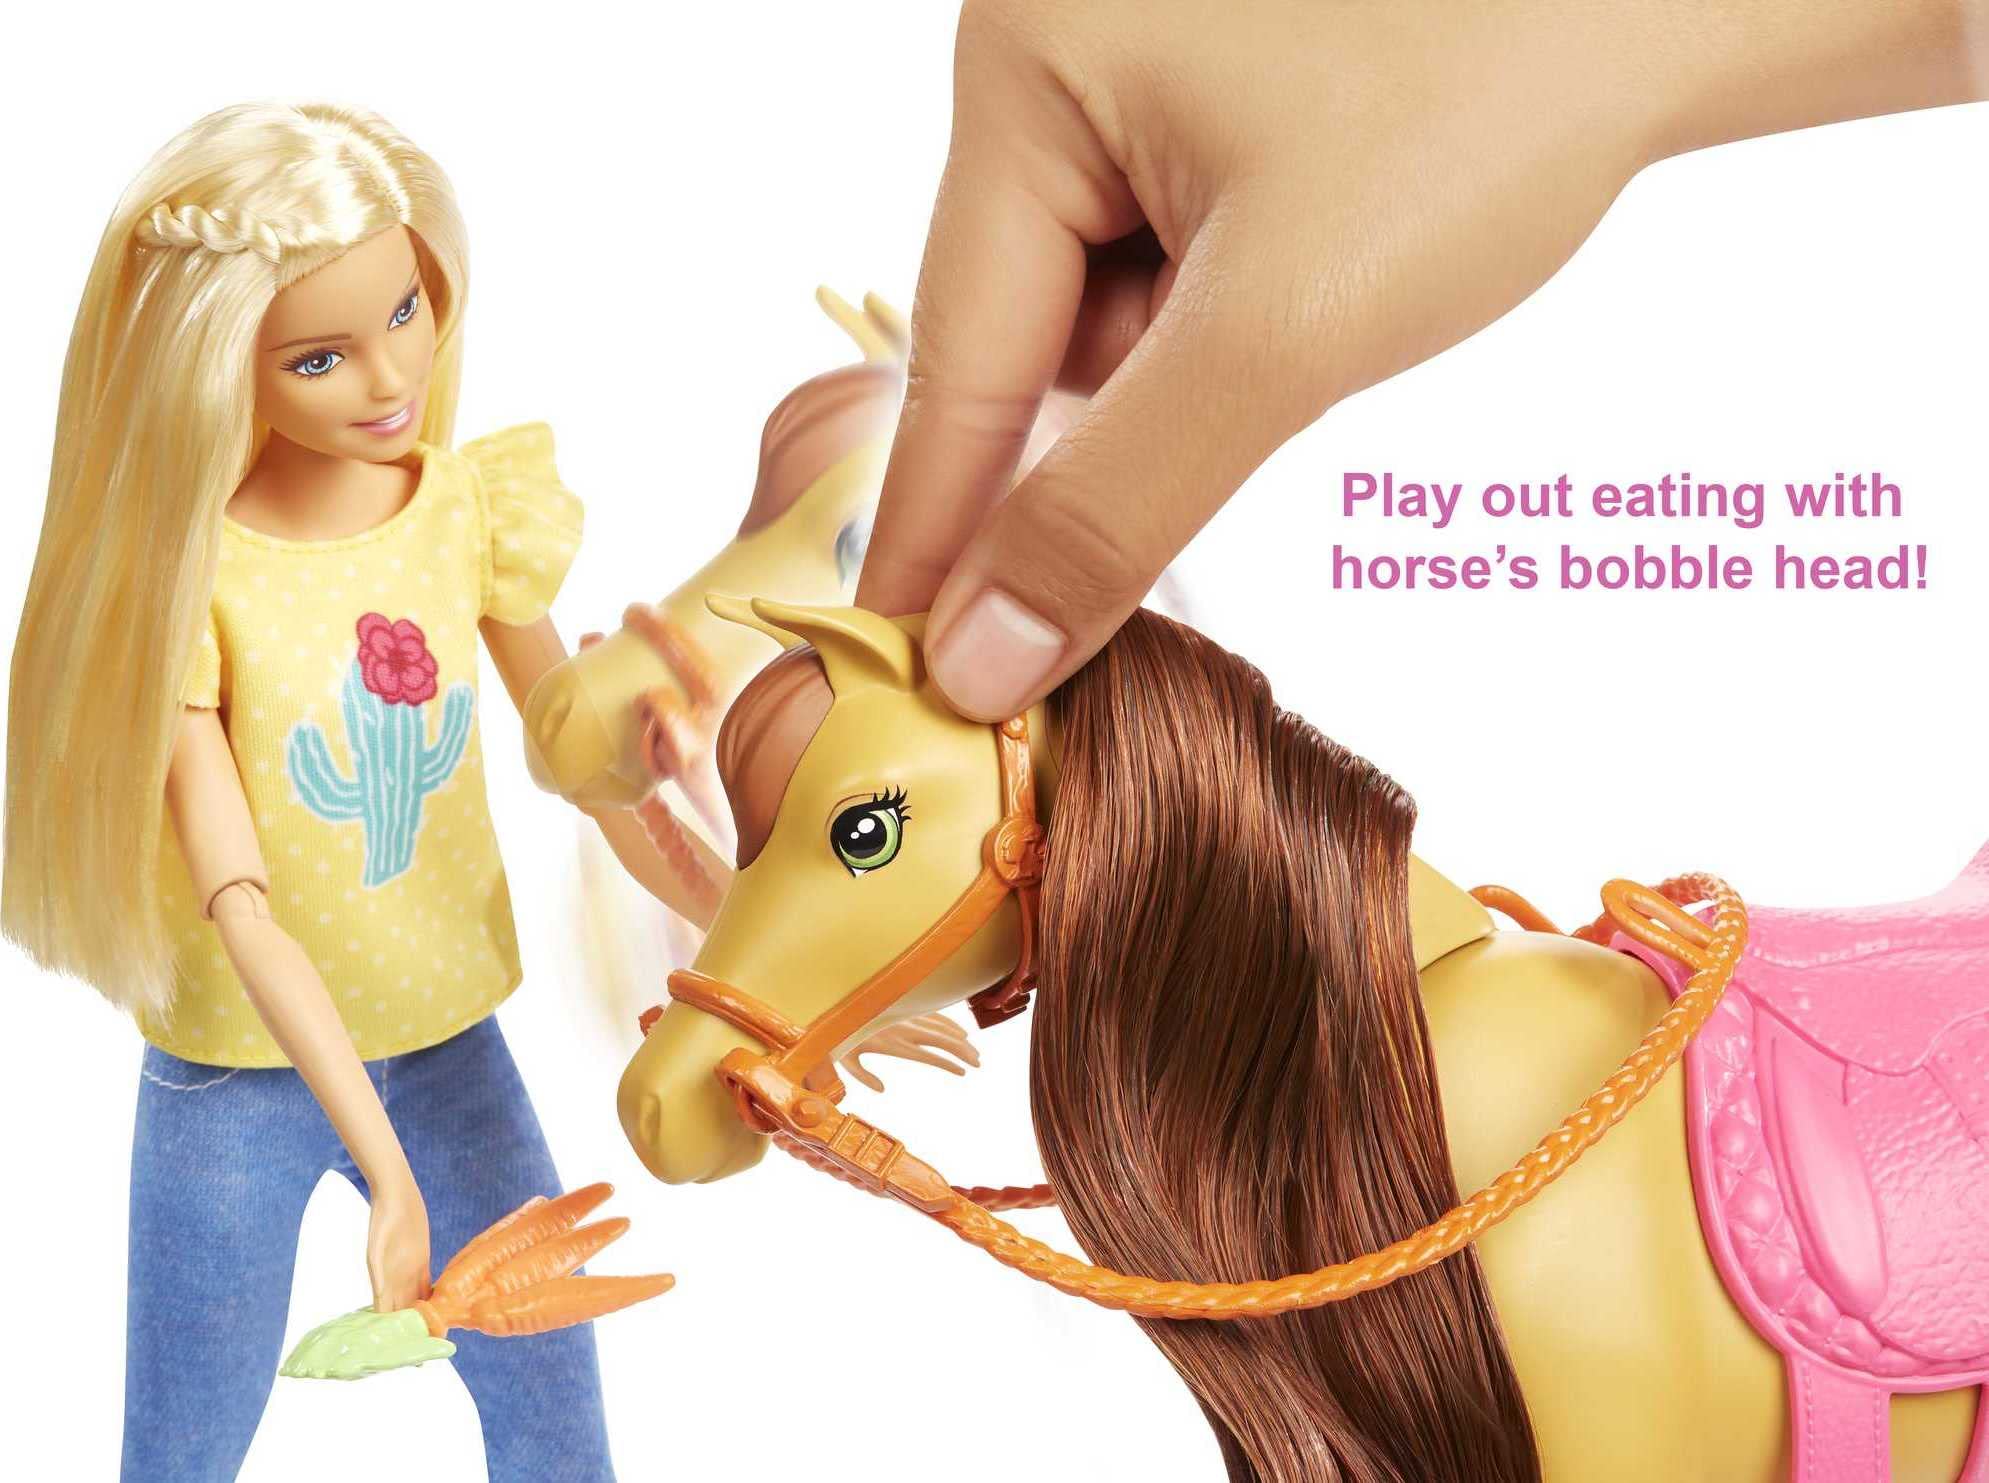 Barbie Playset with Barbie and Chelsea Blonde Dolls, 2 Horses with Bobbling Heads and 15+ Toy Accessories that Include Corral Fencing, Feeding, Grooming, Nurturing and Horseback Riding Pieces